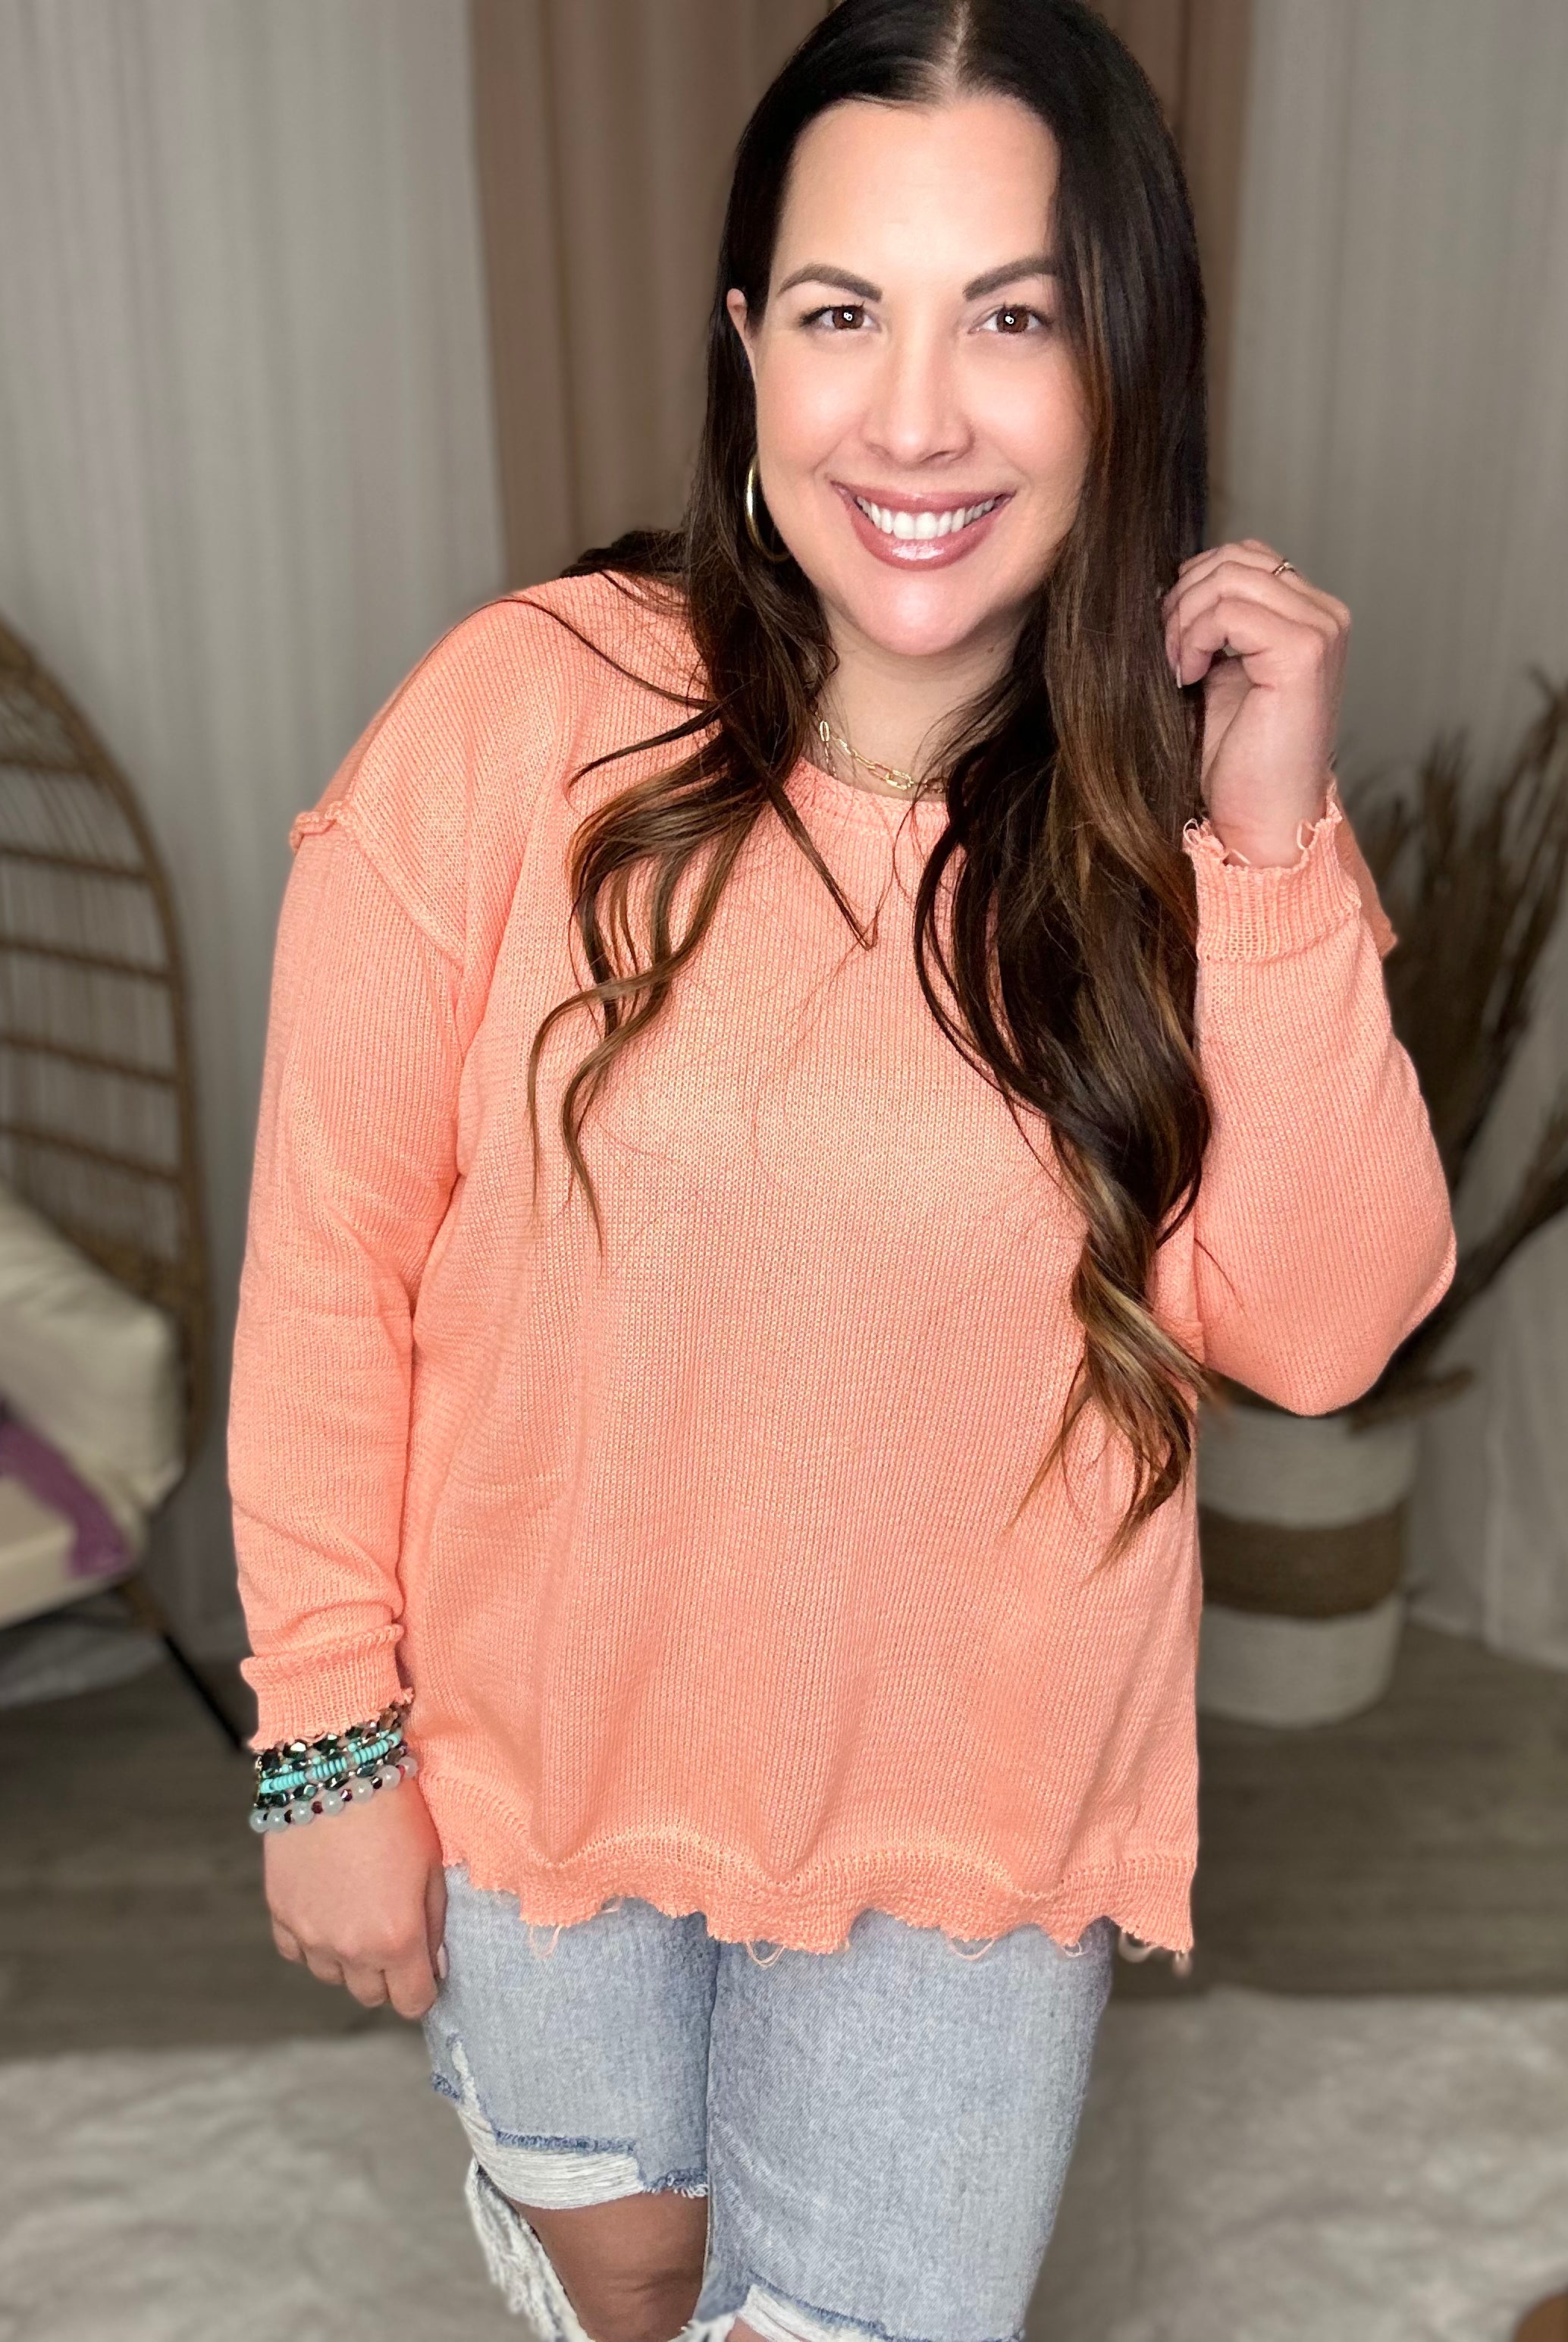 RESTOCK: Piece Of Me Sweater-125 Sweater-Easel-Heathered Boho Boutique, Women's Fashion and Accessories in Palmetto, FL